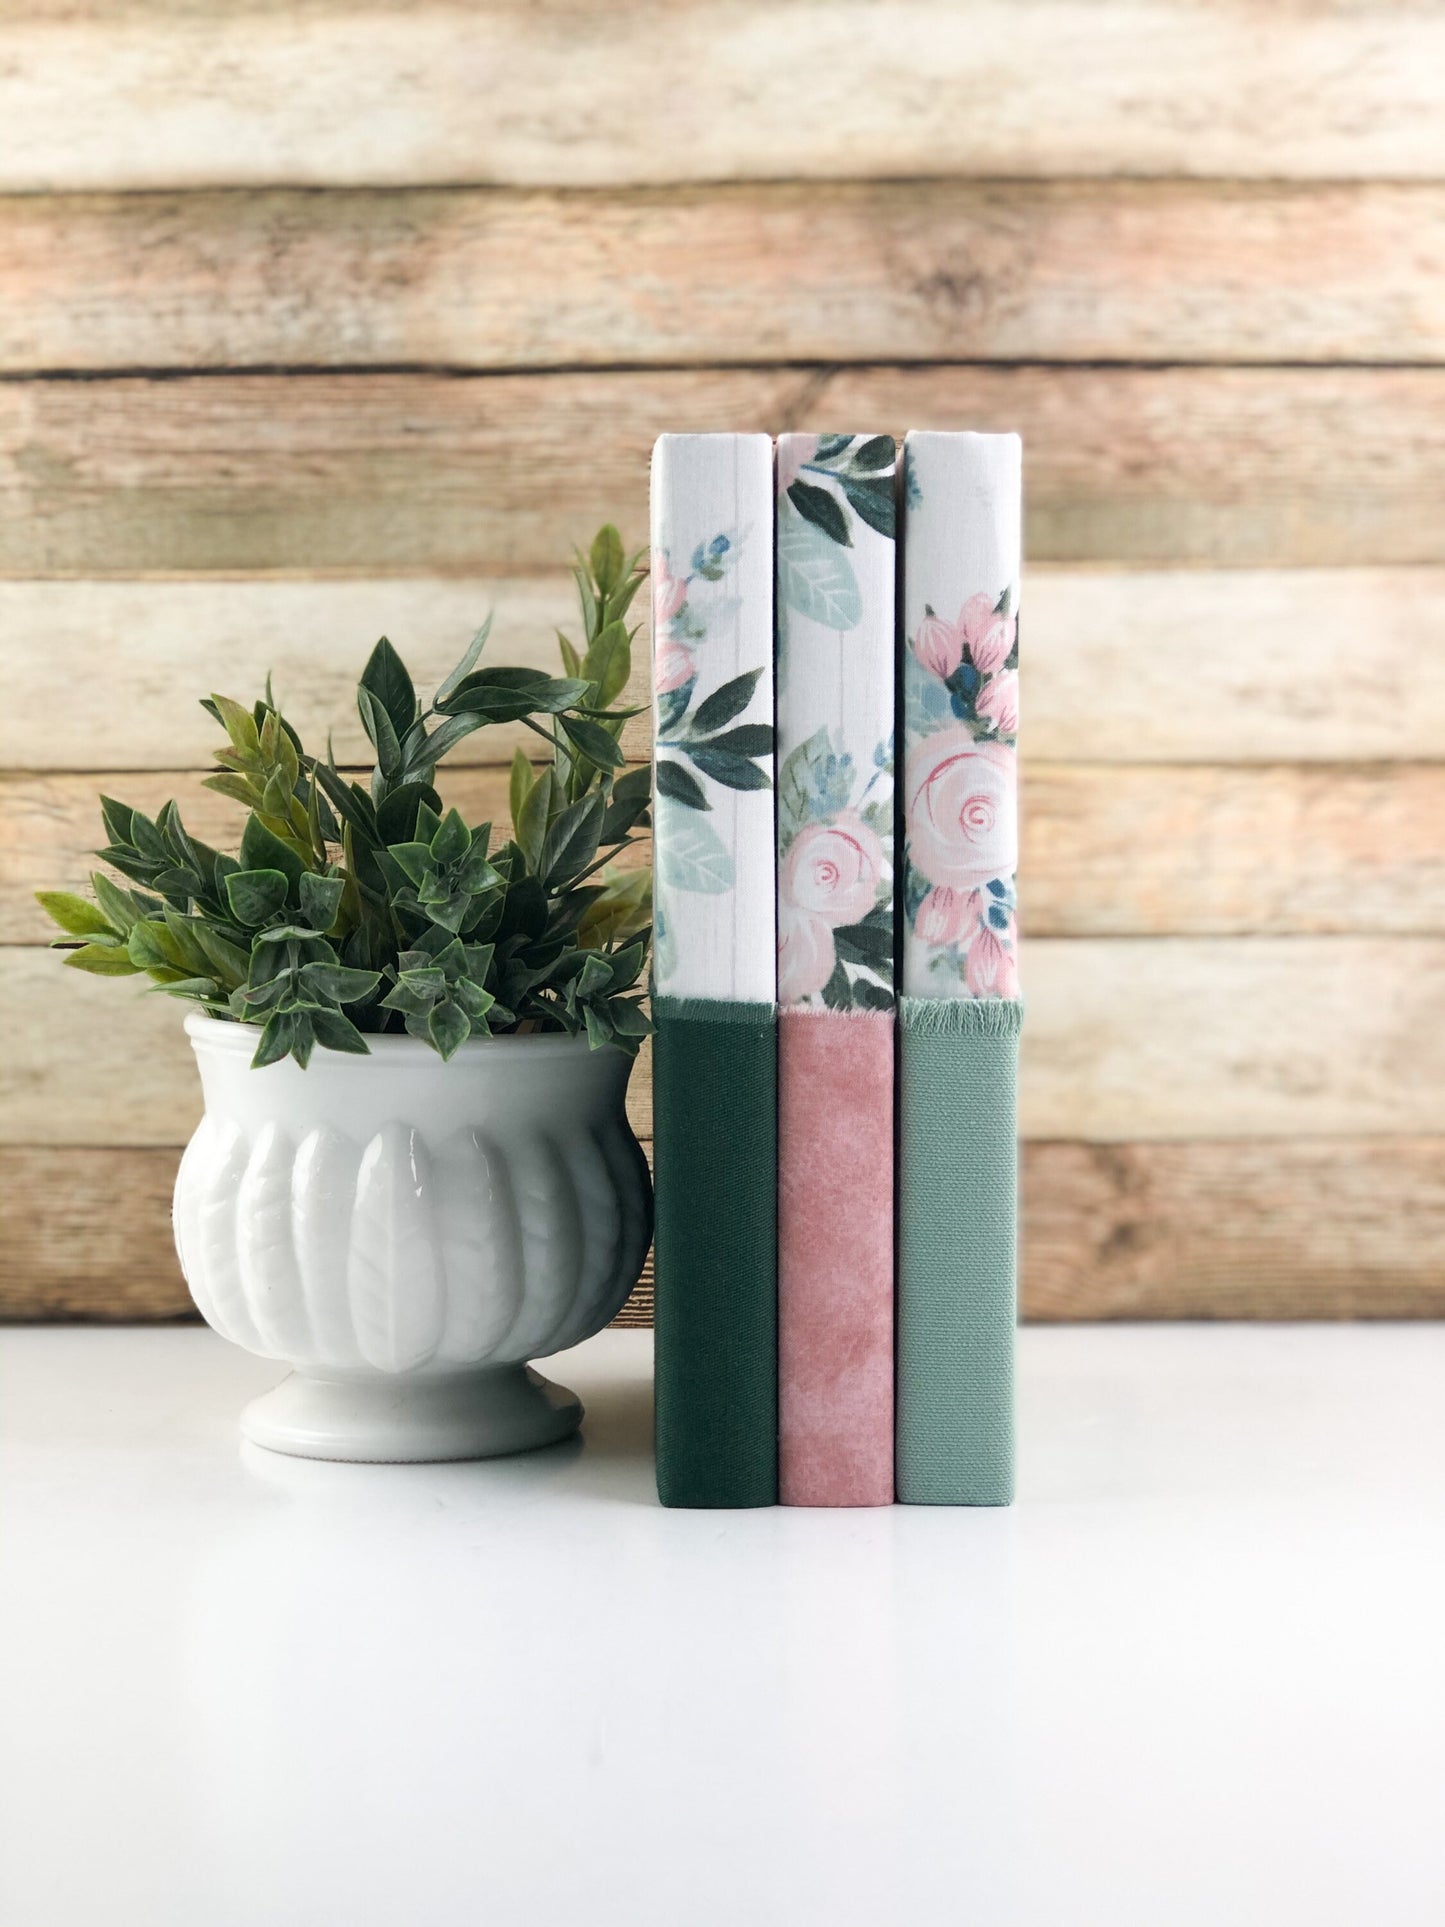 Fabric Covered Books